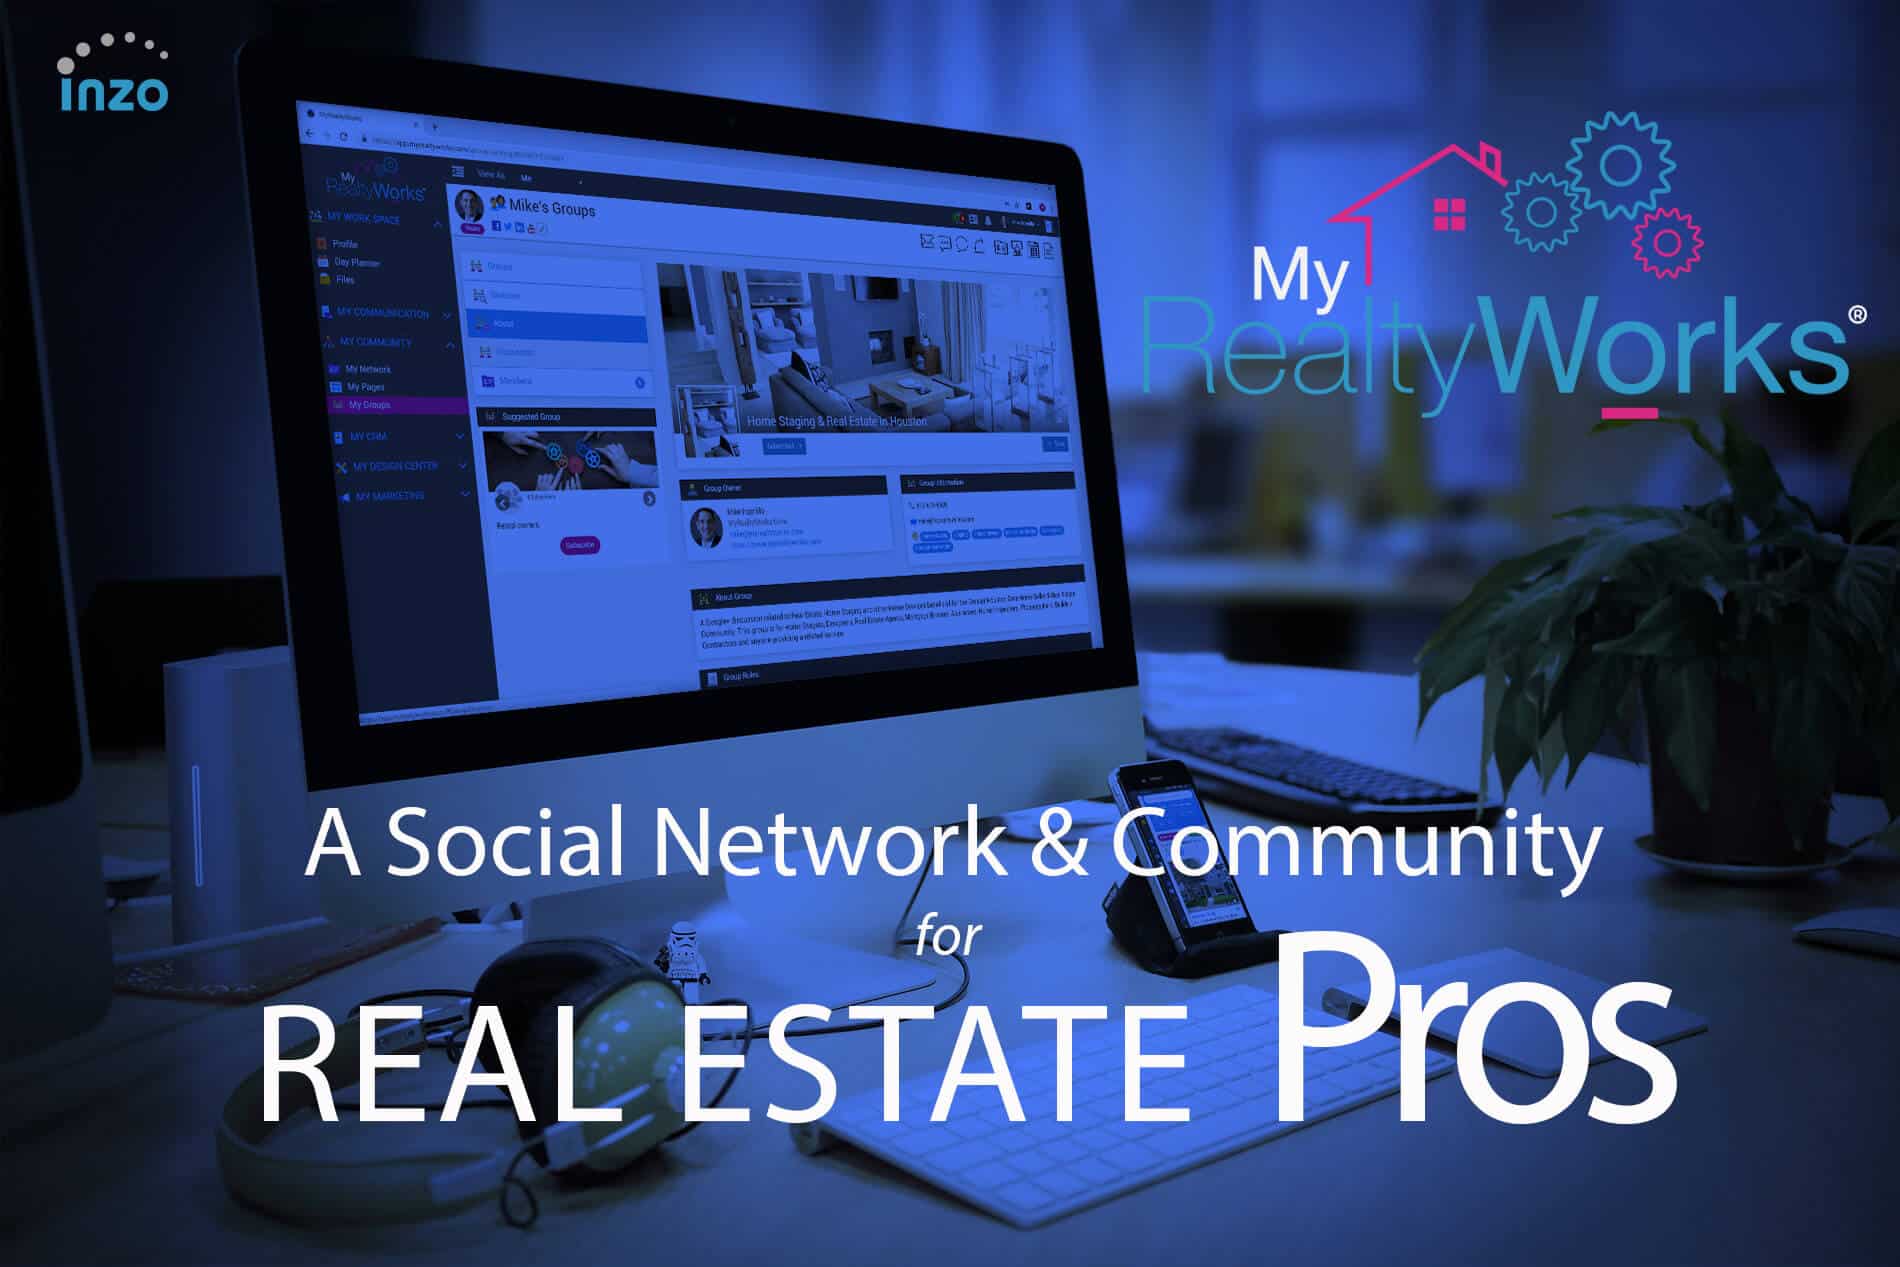 MyRealtyWorks Adds Community Groups to Social Network